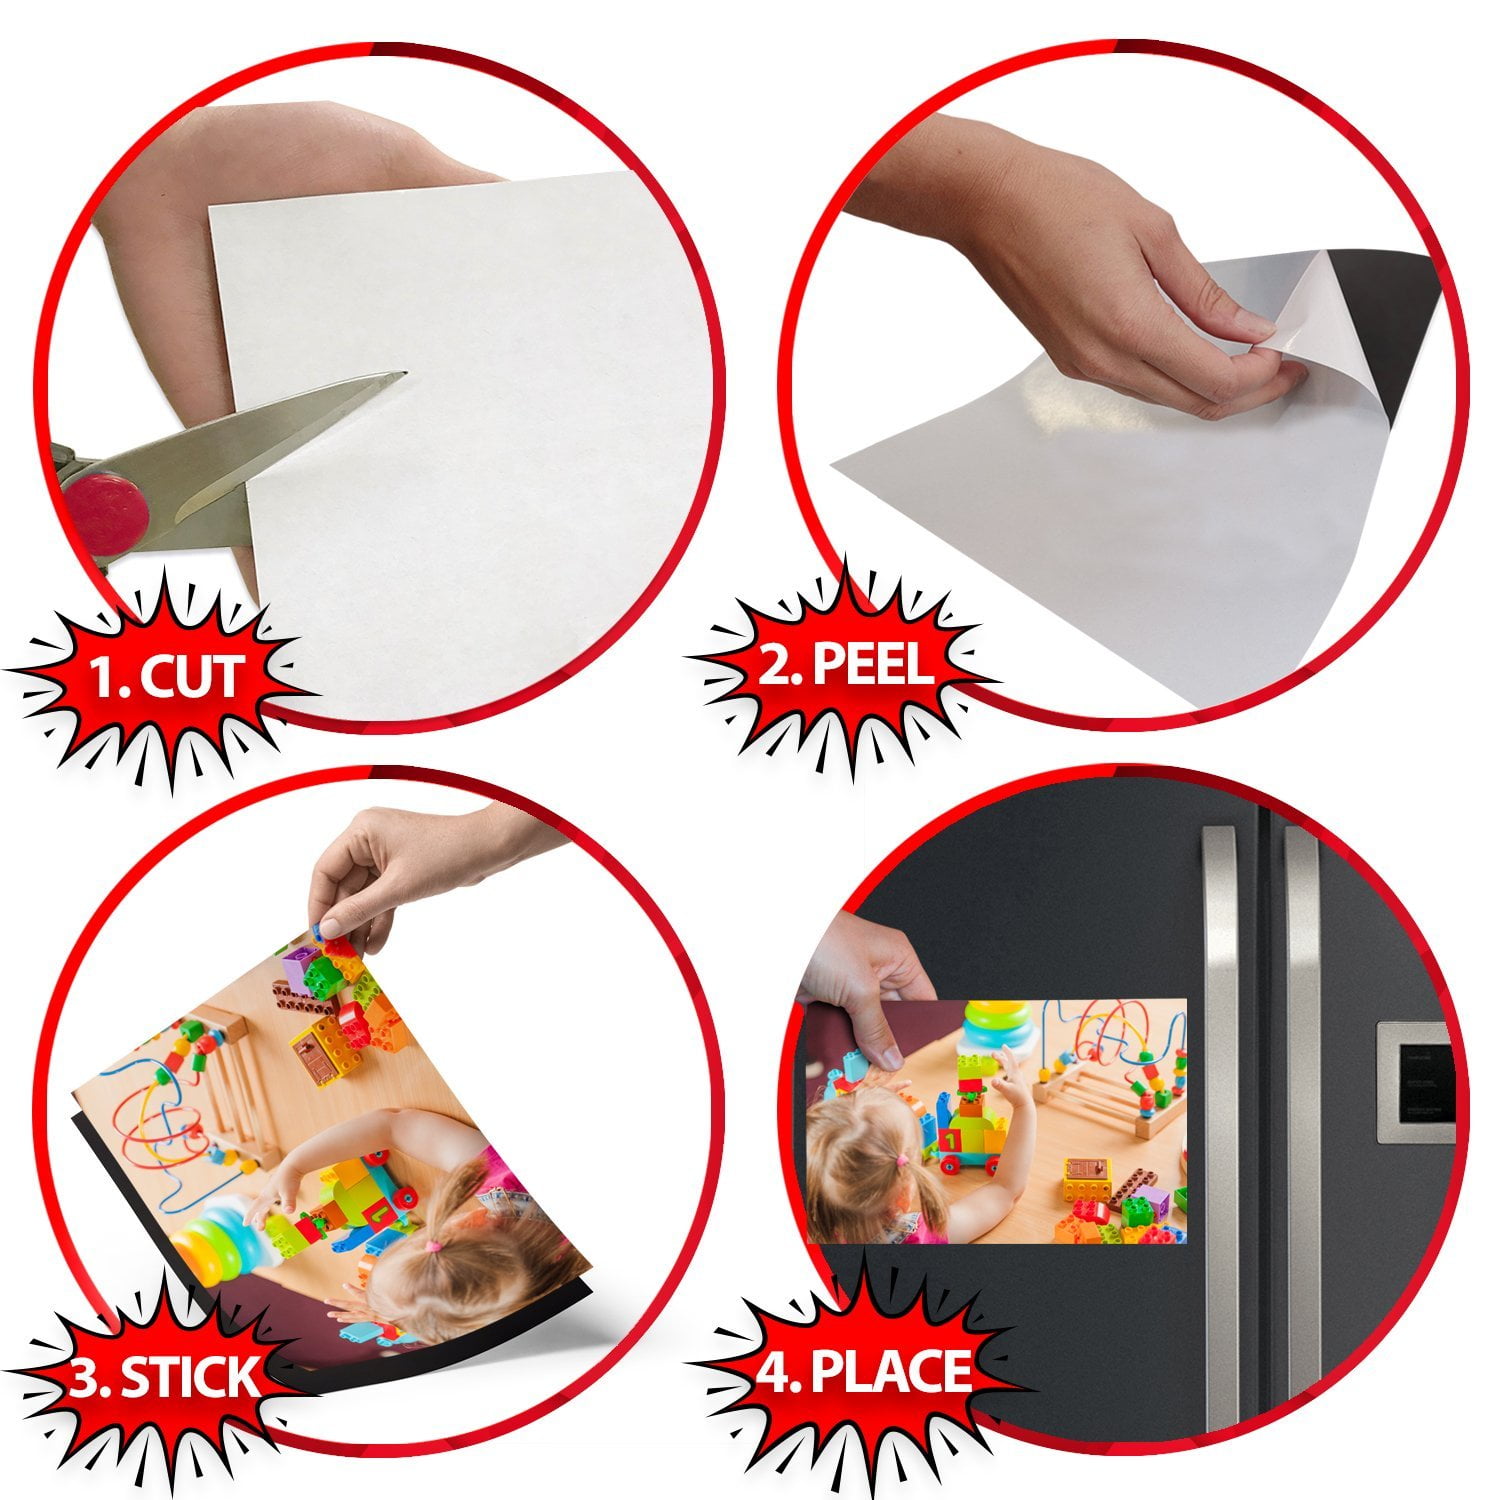 CheckOutStore 5 Flexible Self Adhesive Magnetic Sheets 20 Mil (5 x 7-1/4)